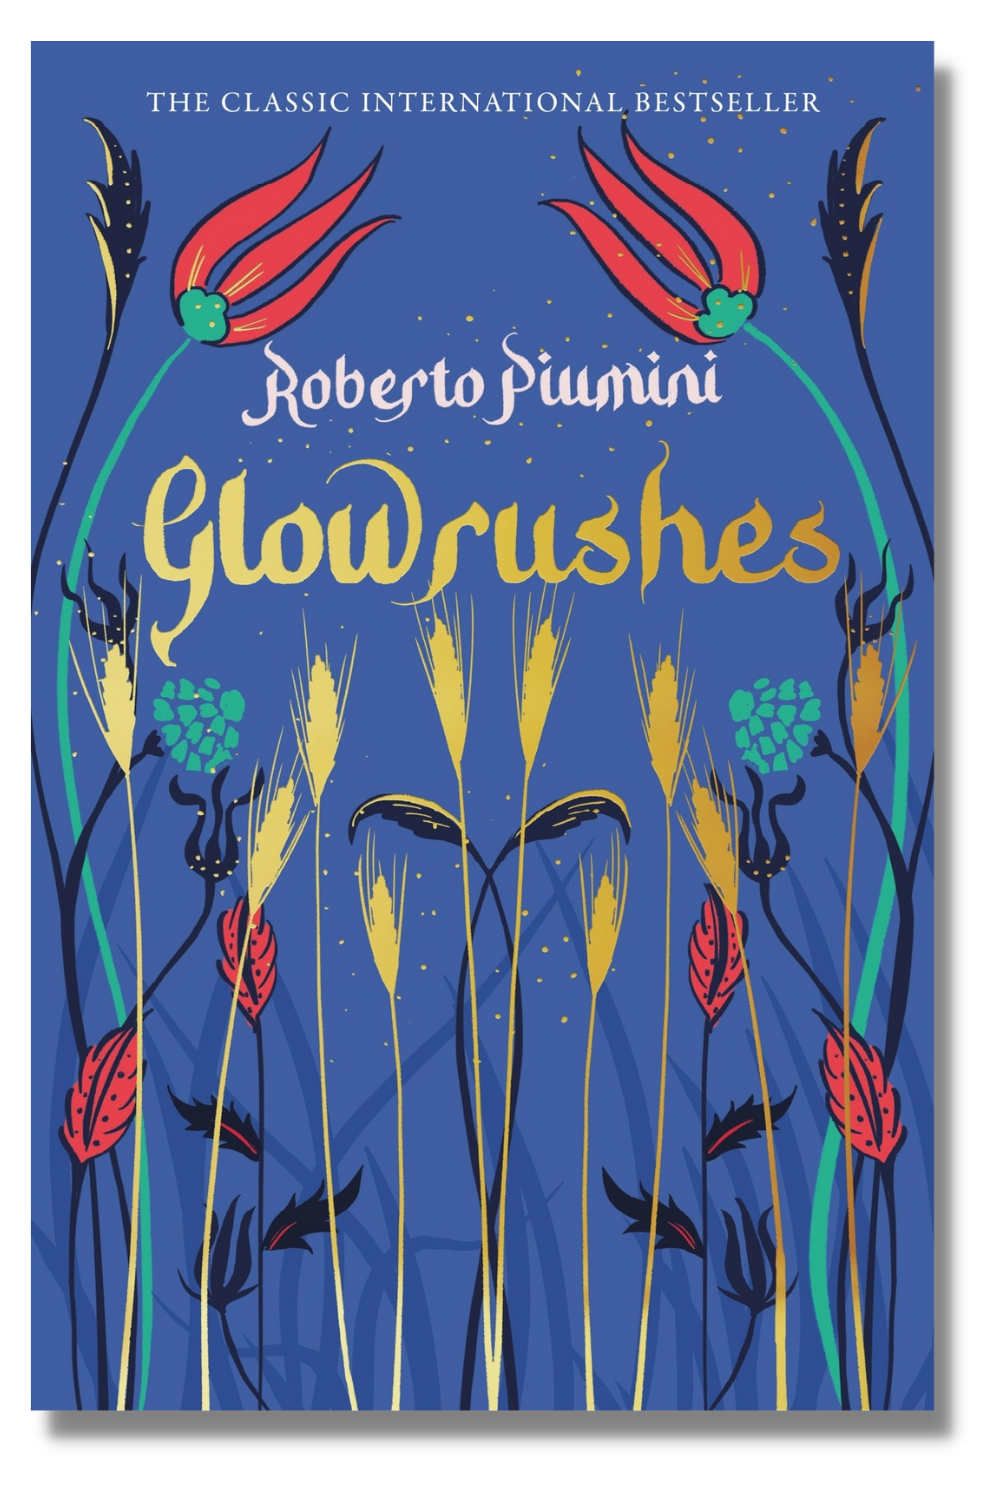 The cover of "Glowrushes"